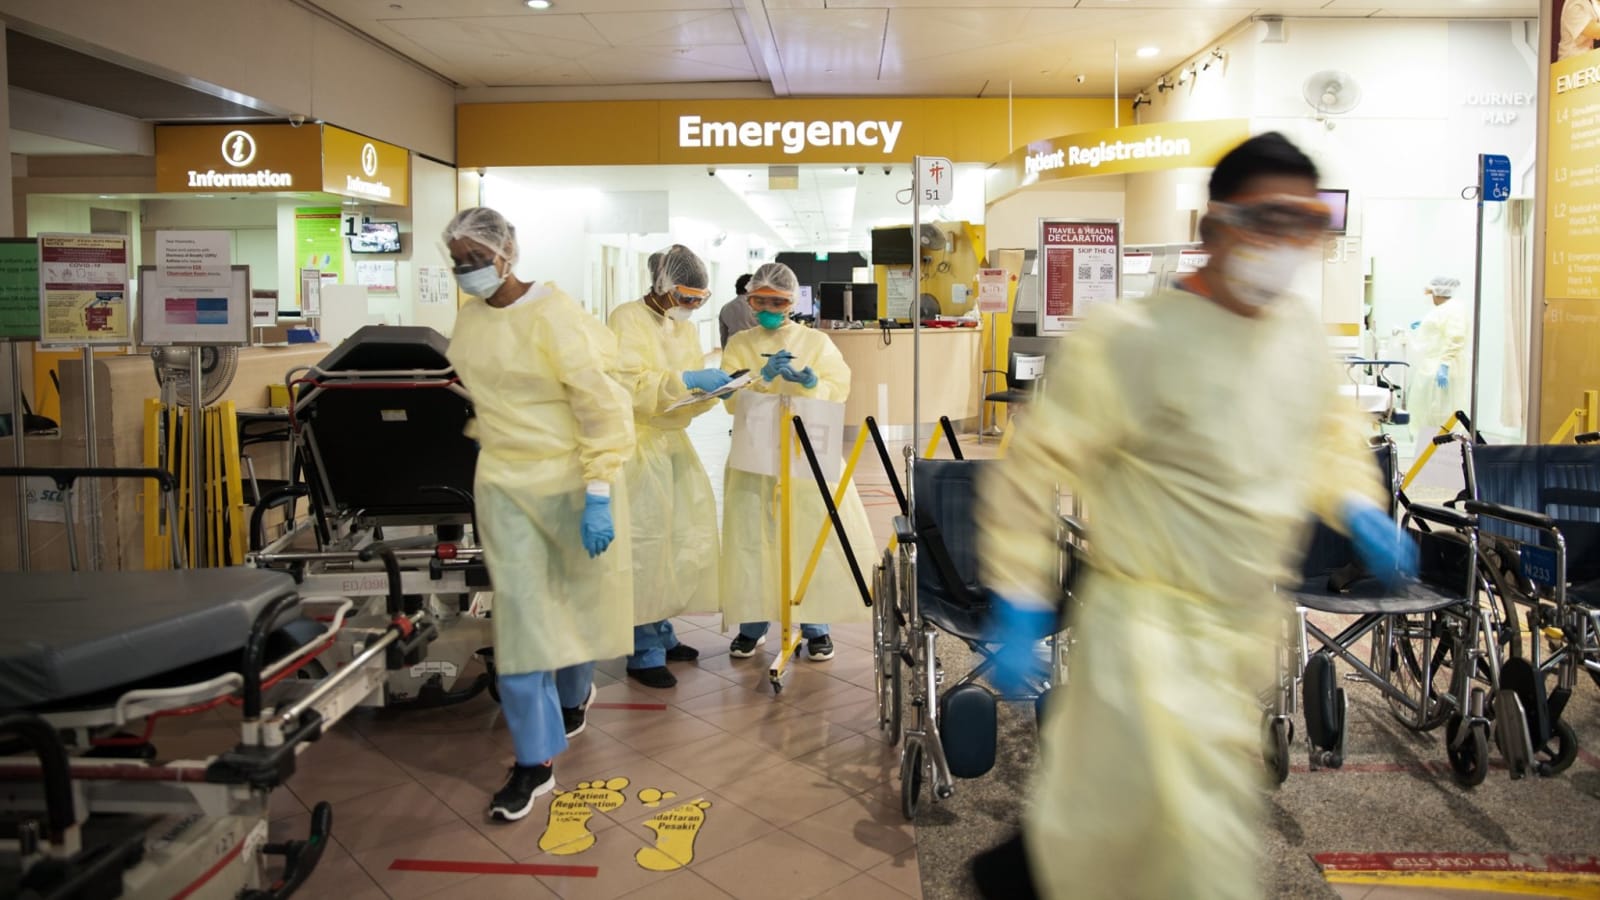 singapore-hospitals-seeing-high-number-of-patients-who-do-not-need-emergency-care:-healthcare-bosses